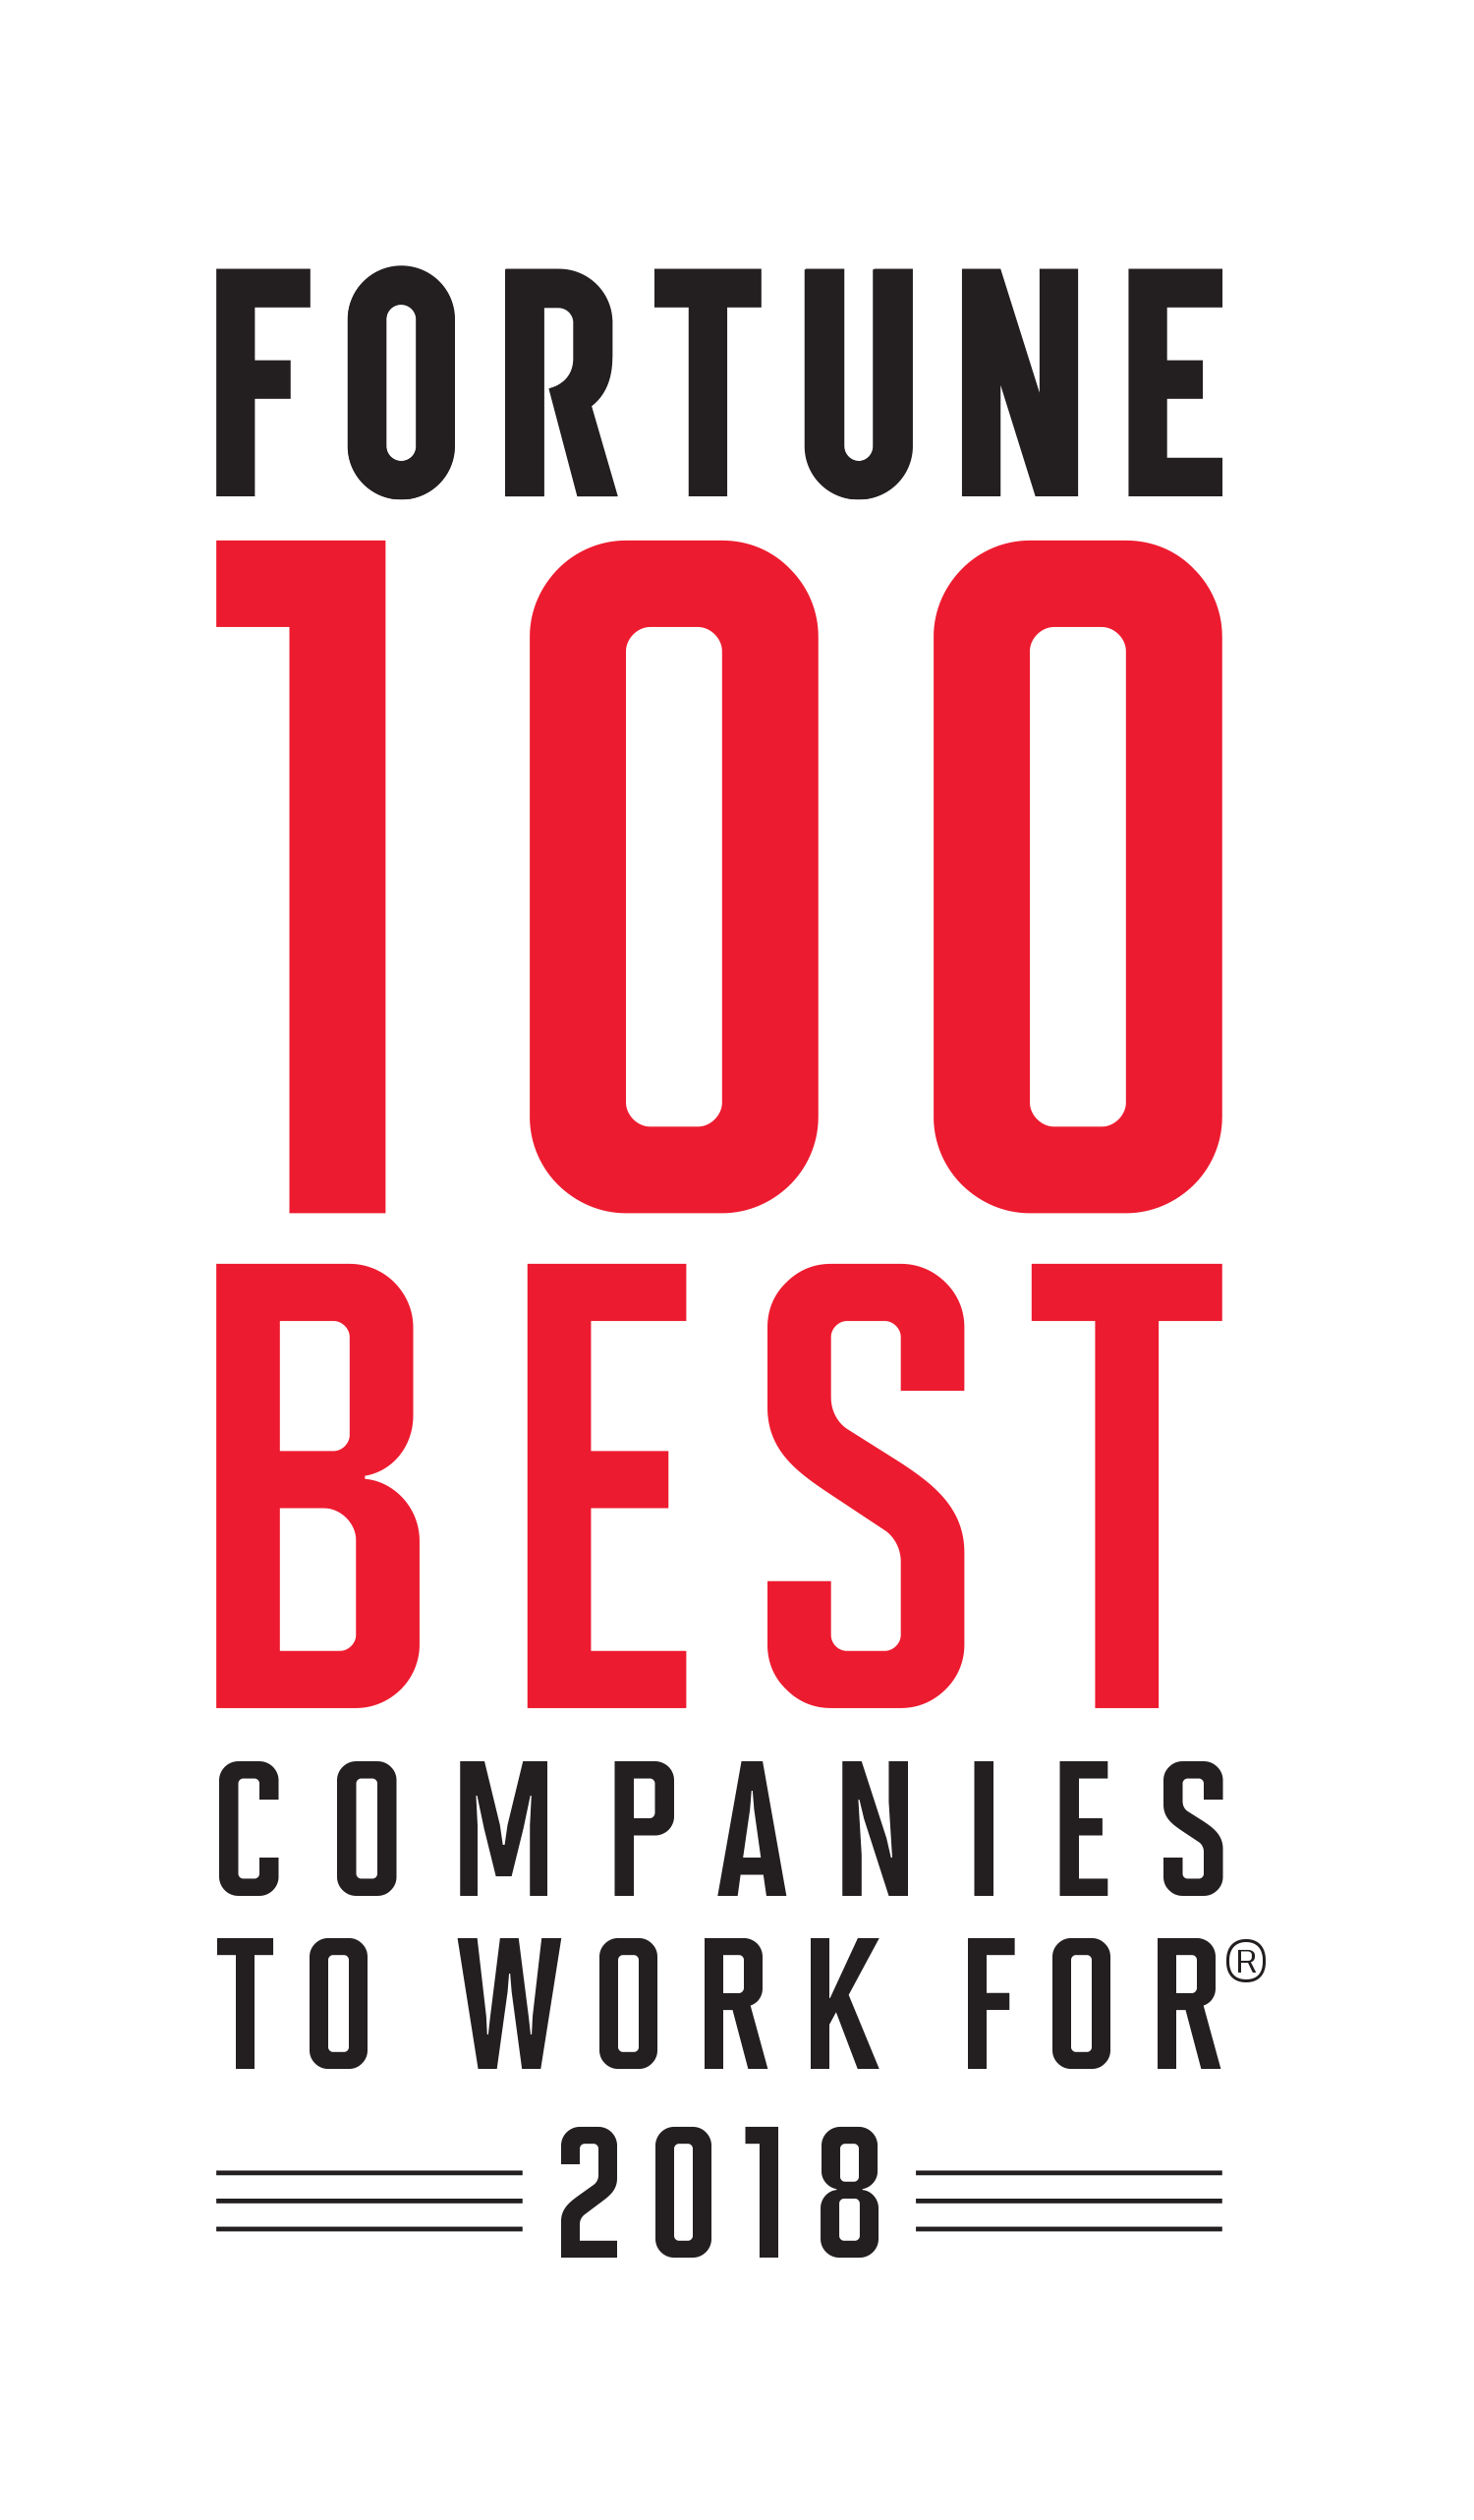  Fortune 100 Best Companies to Work For List Announced Today!